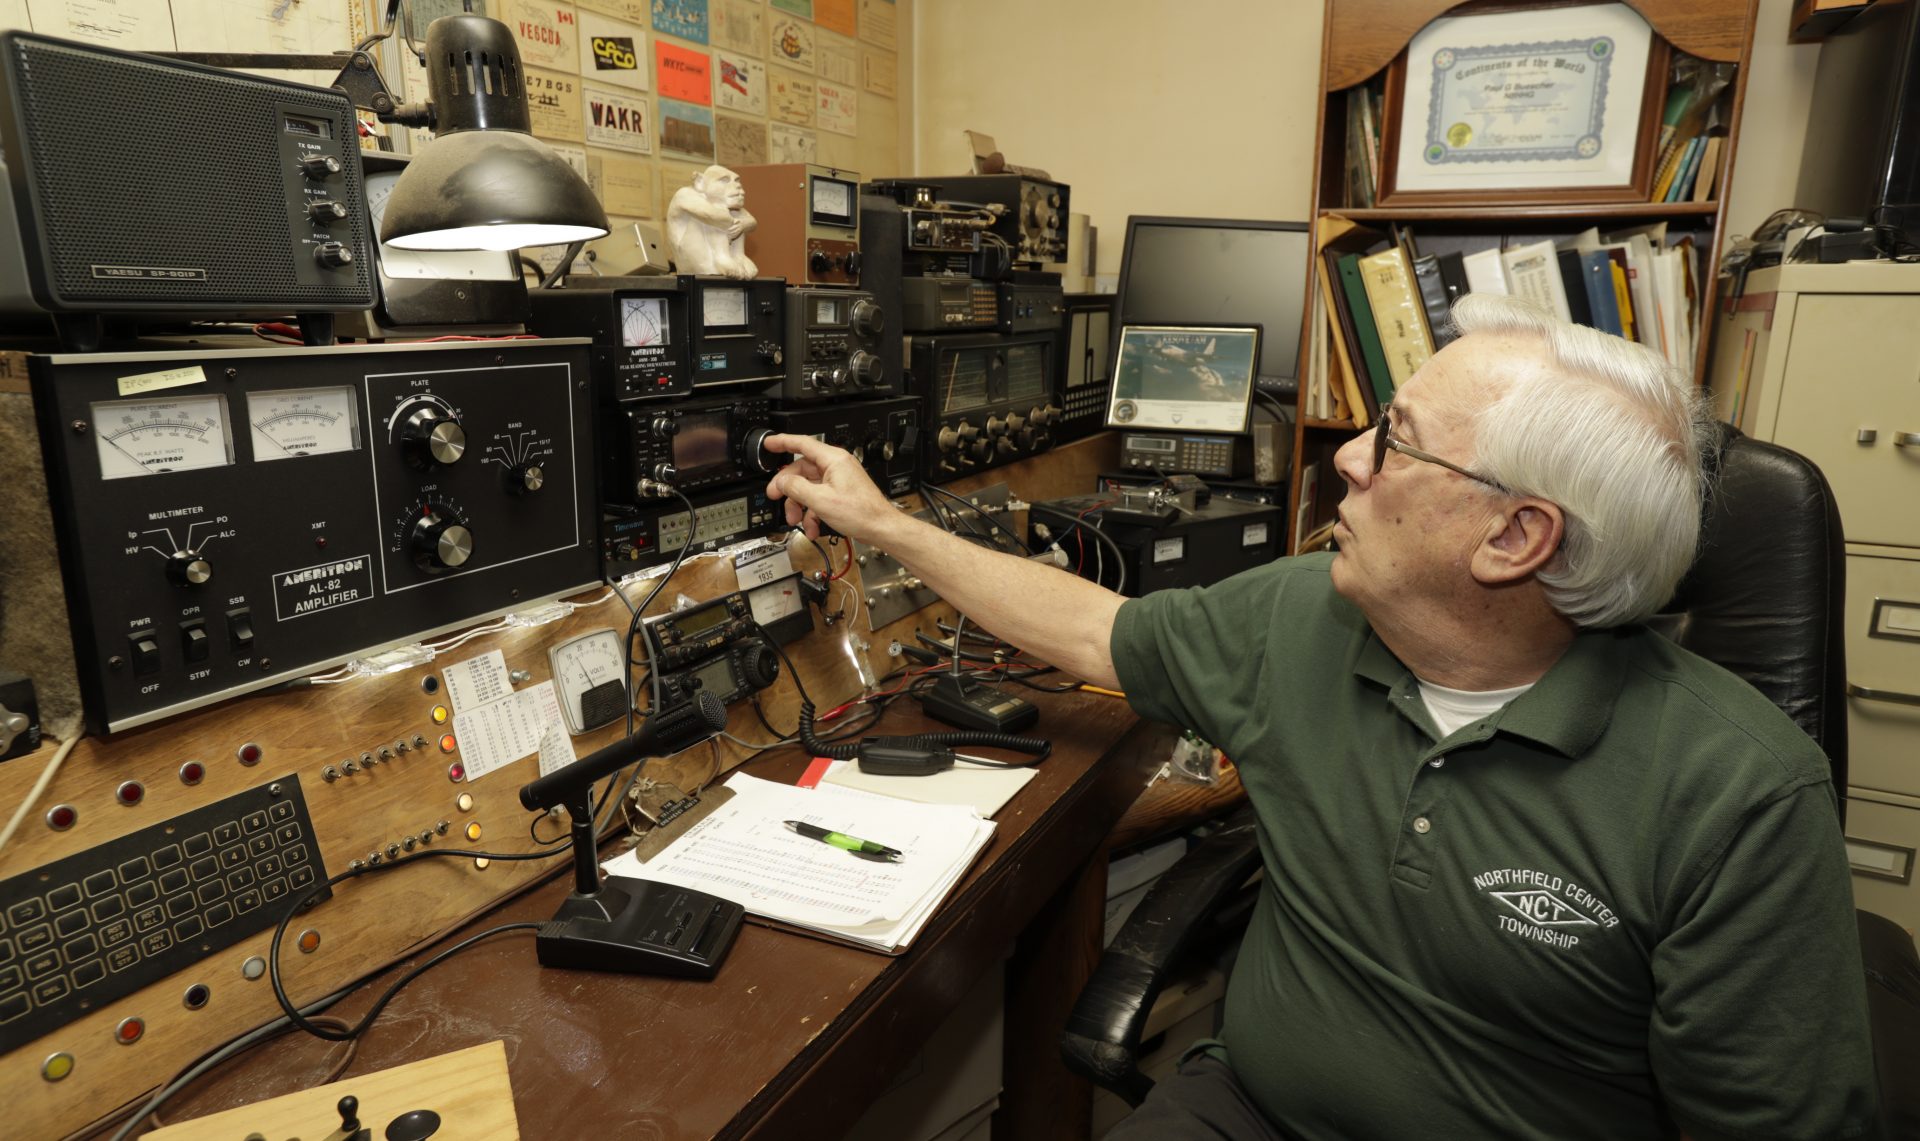 In this Friday, March 13, 2020 photo, Paul Buescher adjusts his ham radio, in Northfield Center Township, Ohio. Buescher is one of 32 members of a group in northeastern Ohio that shares a farm packed with enough canned and dehydrated food and water to last for years. For those in the often-mocked "prepper" community, this is quickly becoming their "I told you so" moment, as panic buying has cleared store shelves across the U.S. amid growing fears that the new coronavirus will force many Americans to self-quarantine for weeks in their homes.